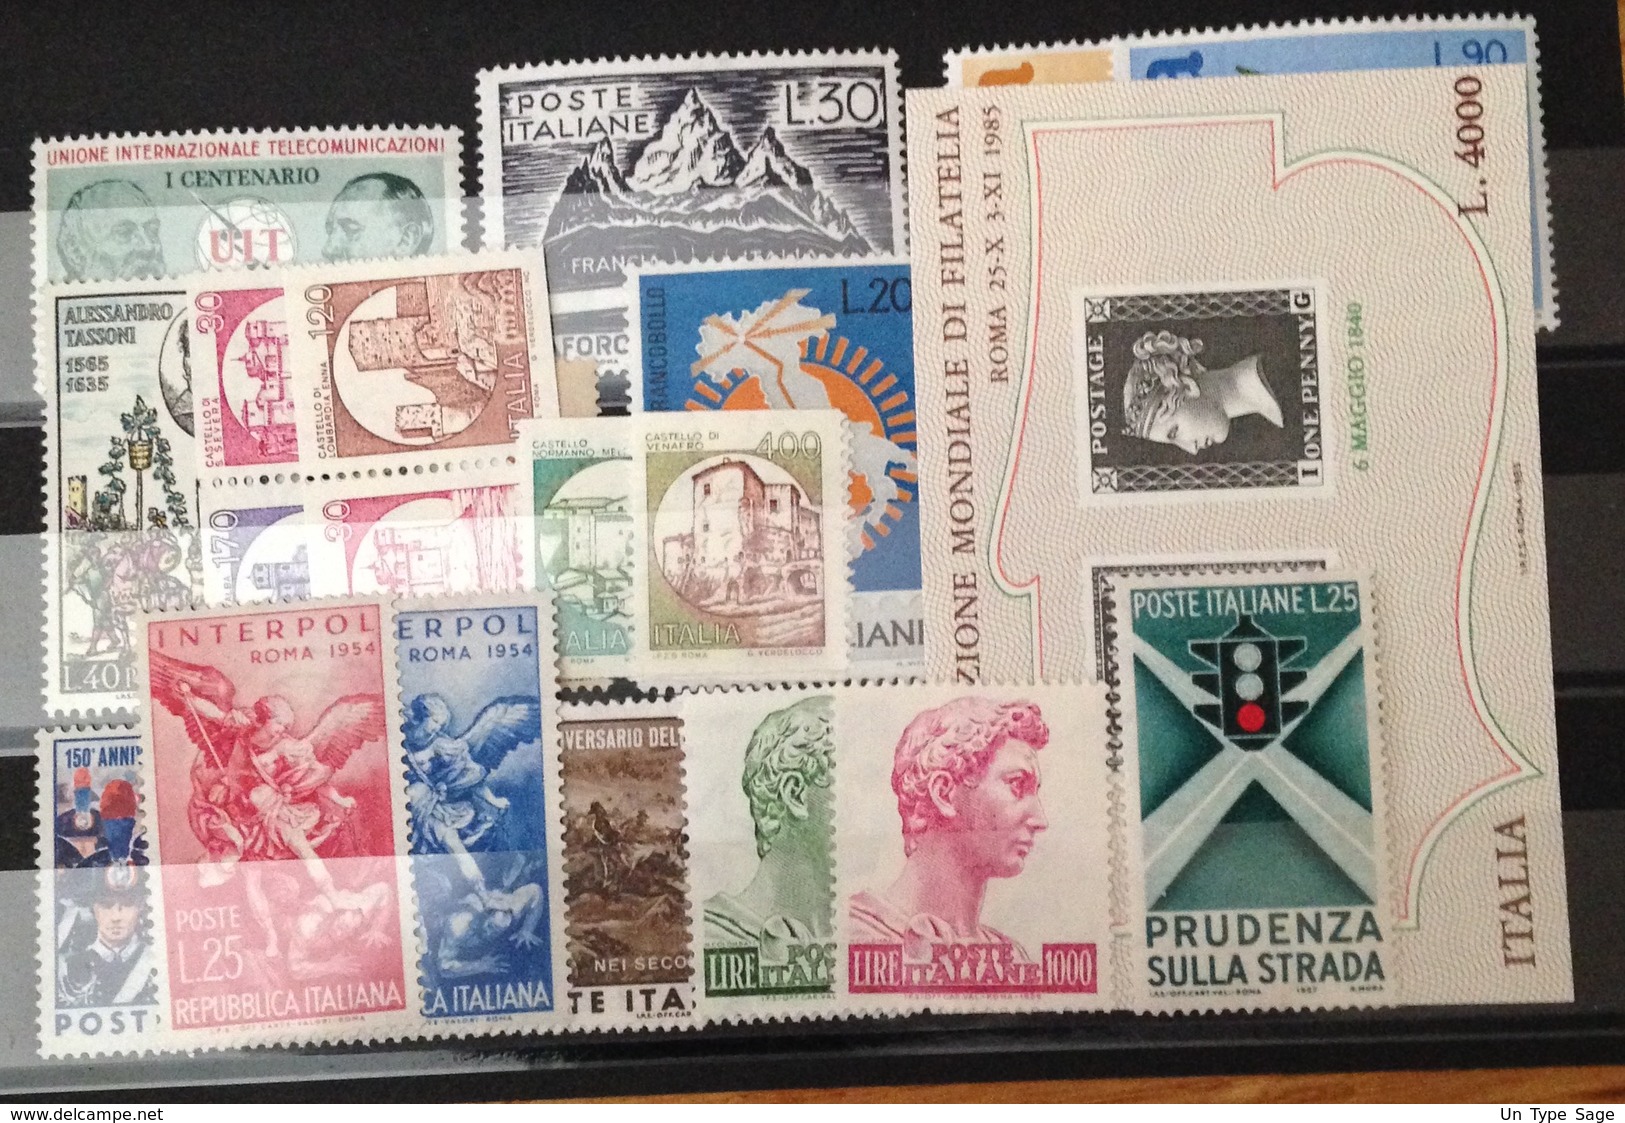 Italie - Lot De Timbres Neuf - (F564) - 1961-70: Mint/hinged